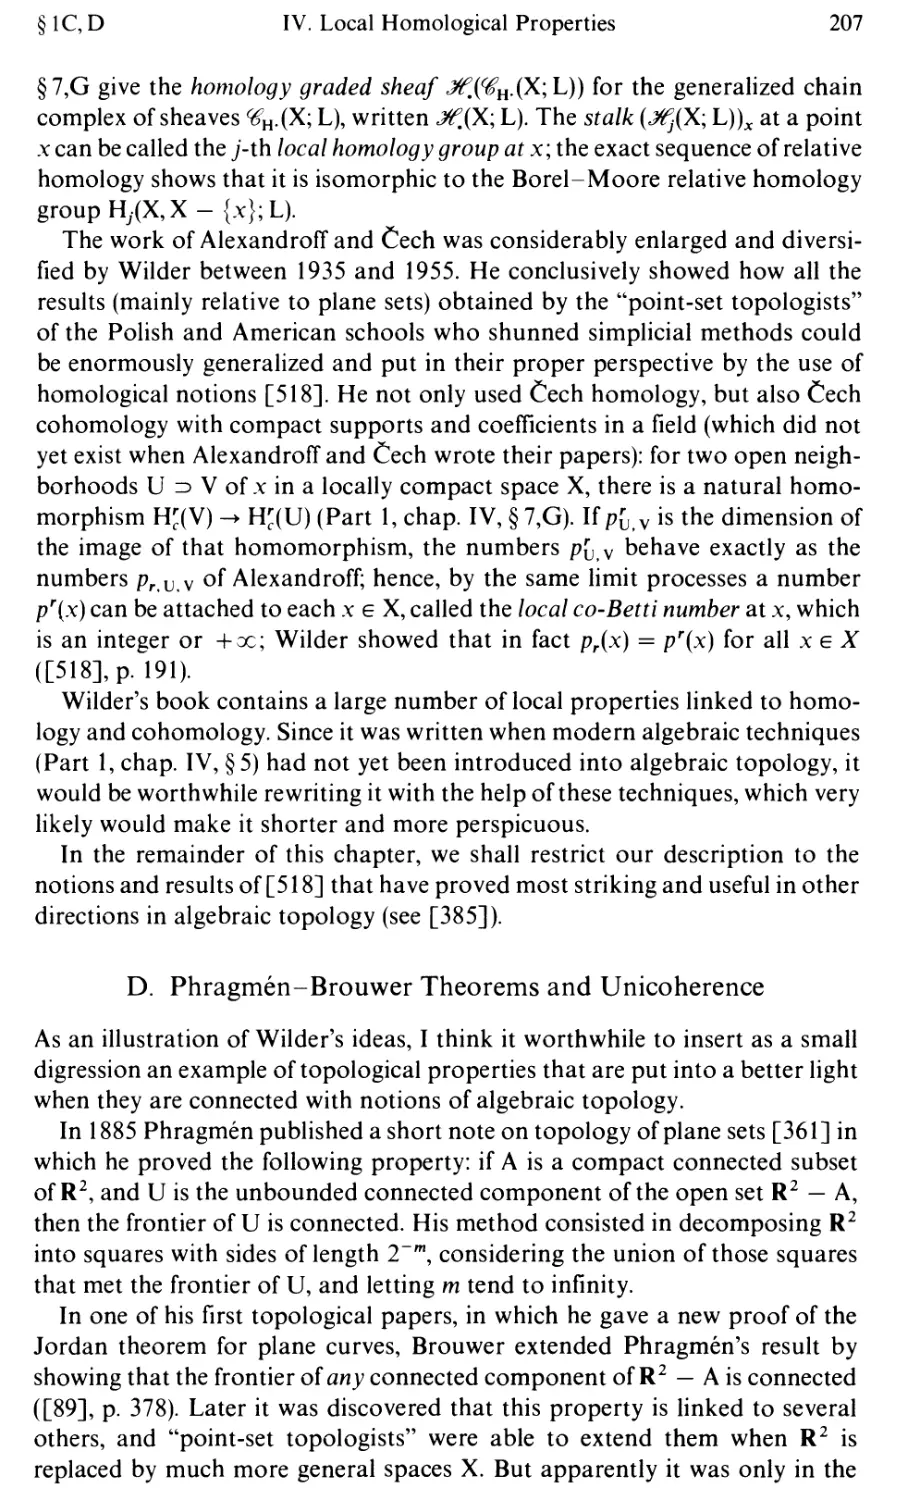 D. Phragmén-Brouwer Theorems and Unicoherence